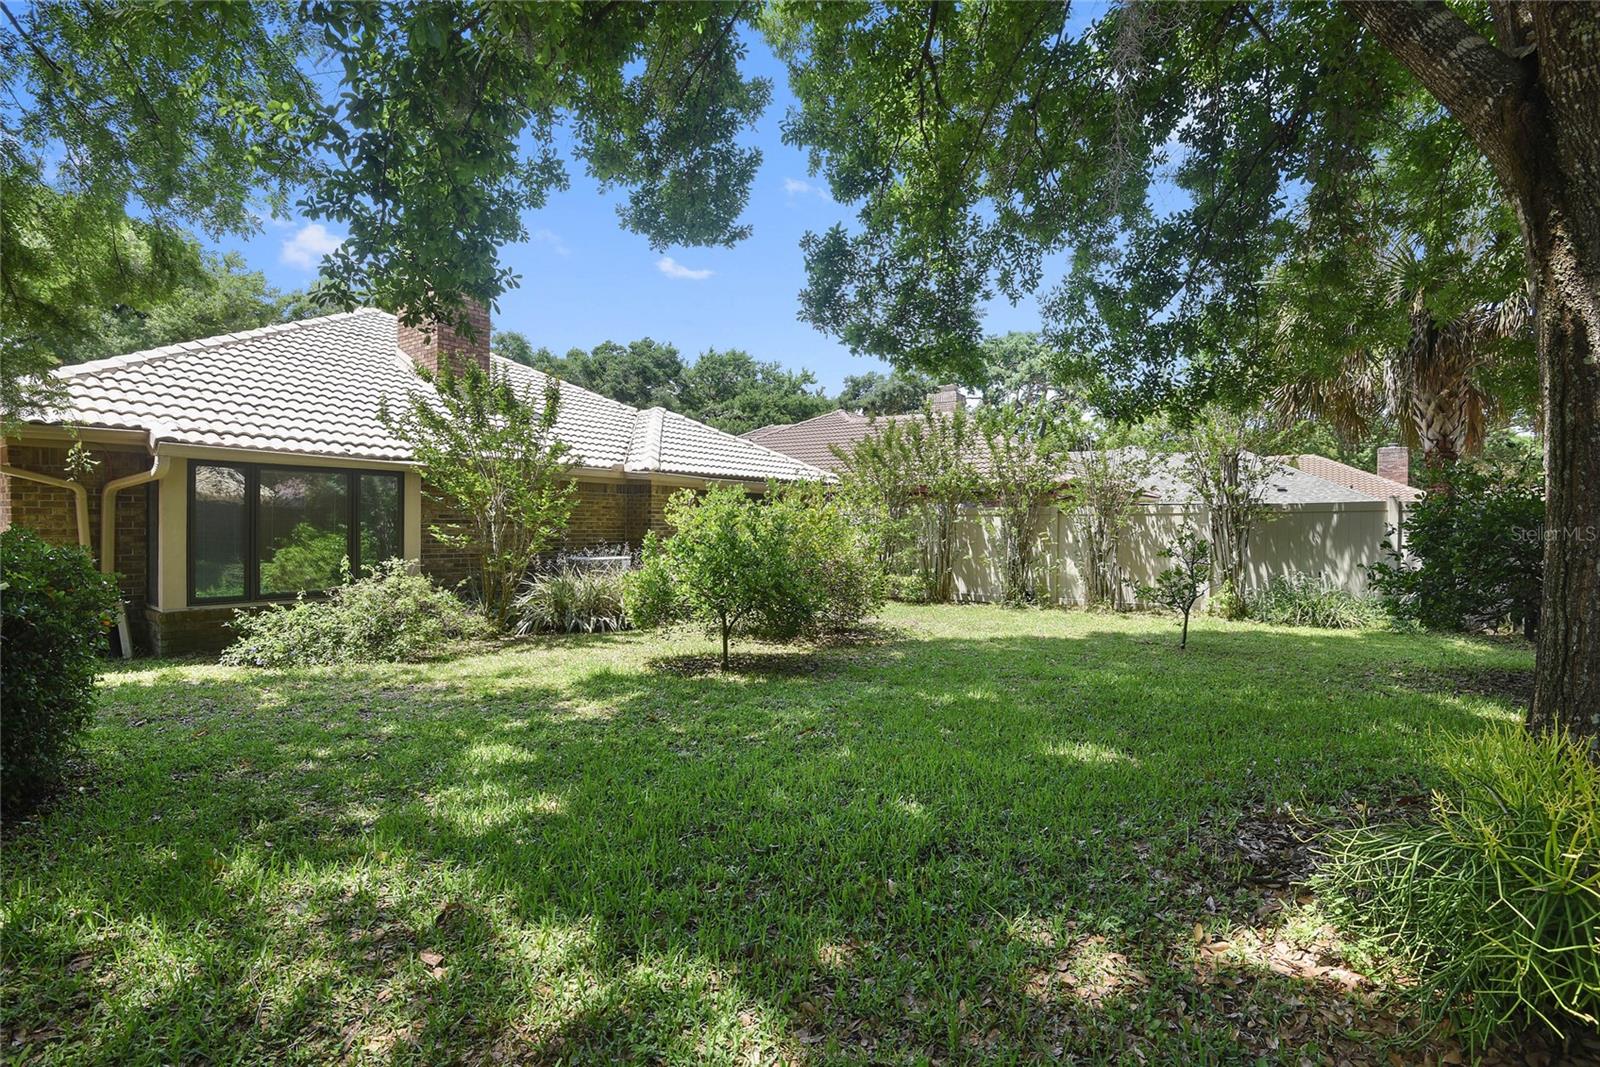 Property listing photo for 1841 JESSICA COURT